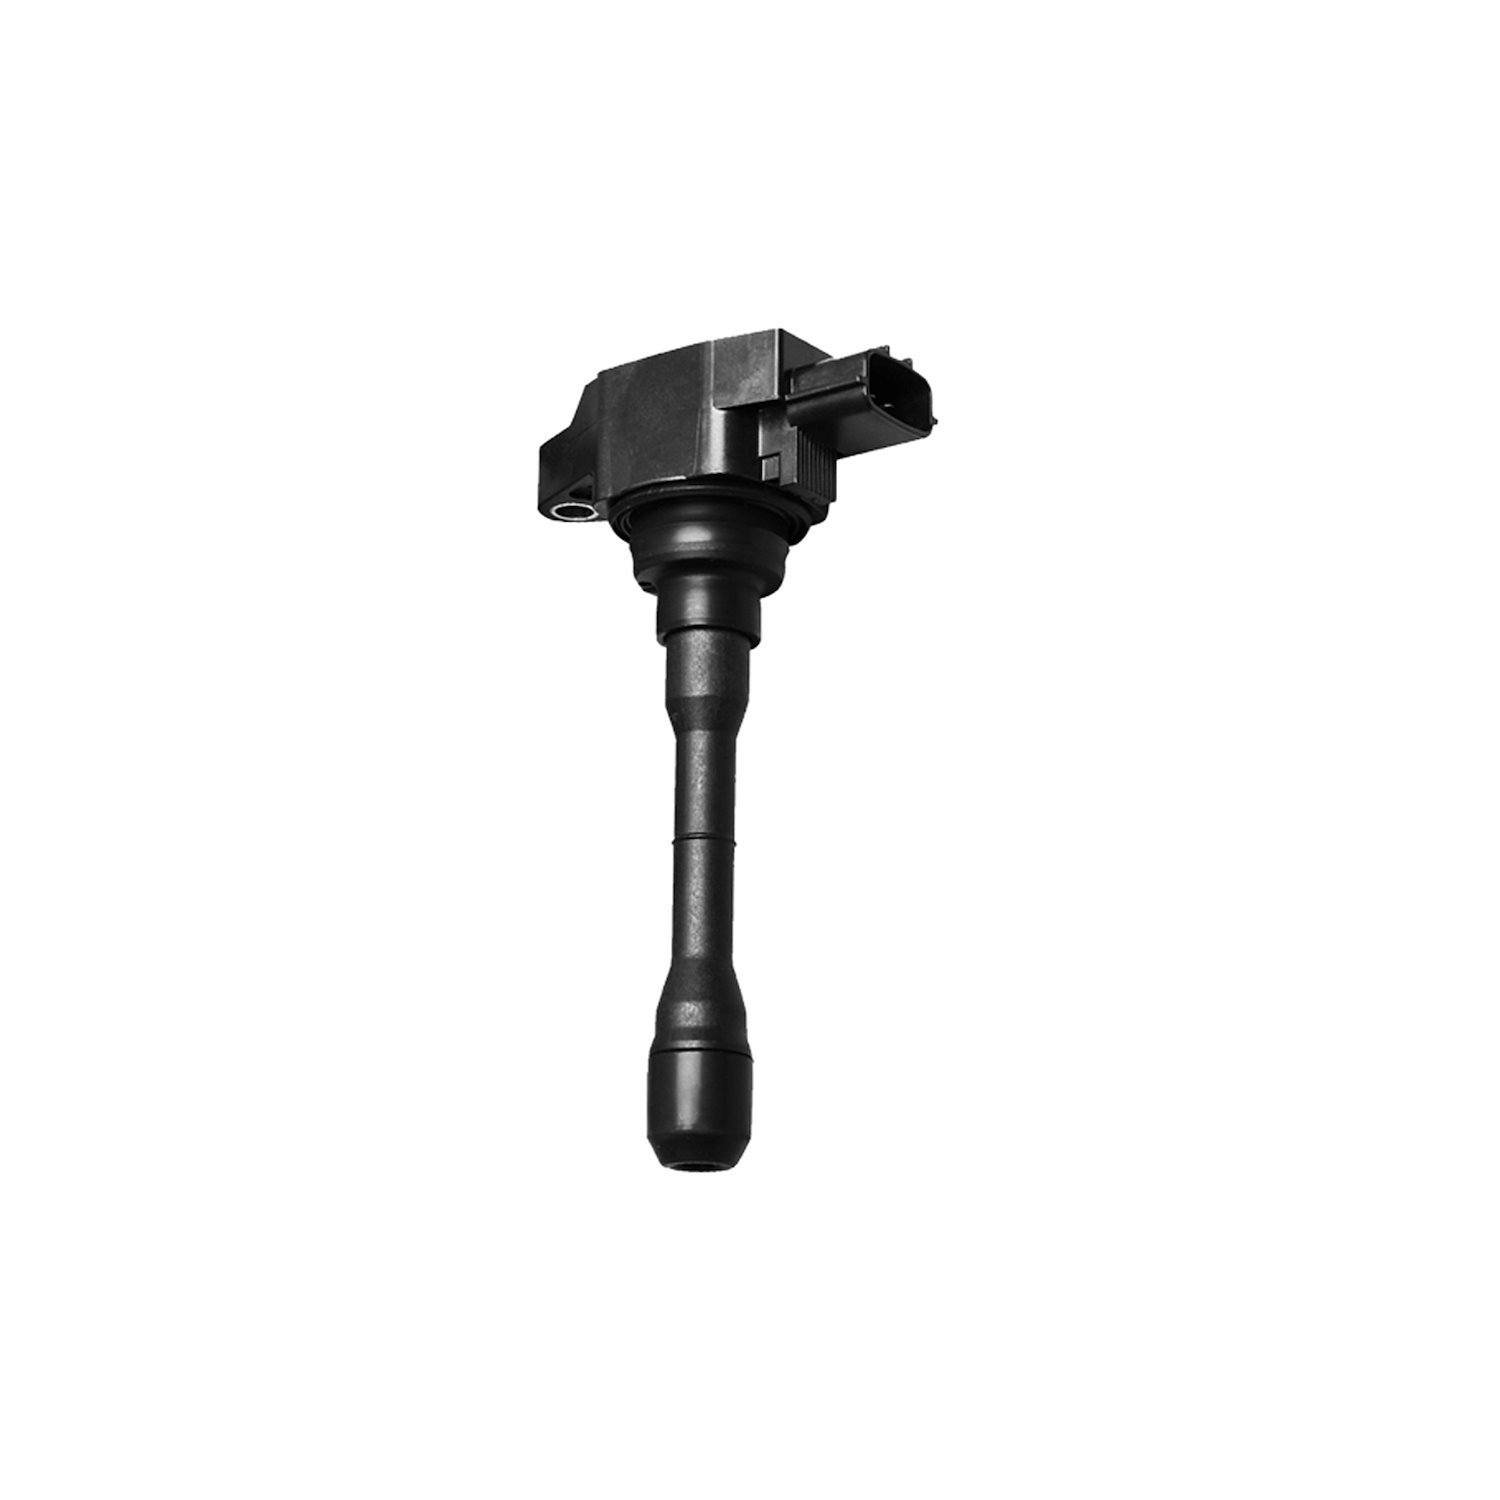 OE Replacement Ignition Coil for 3.0L V6 Infinity Q50 Q60